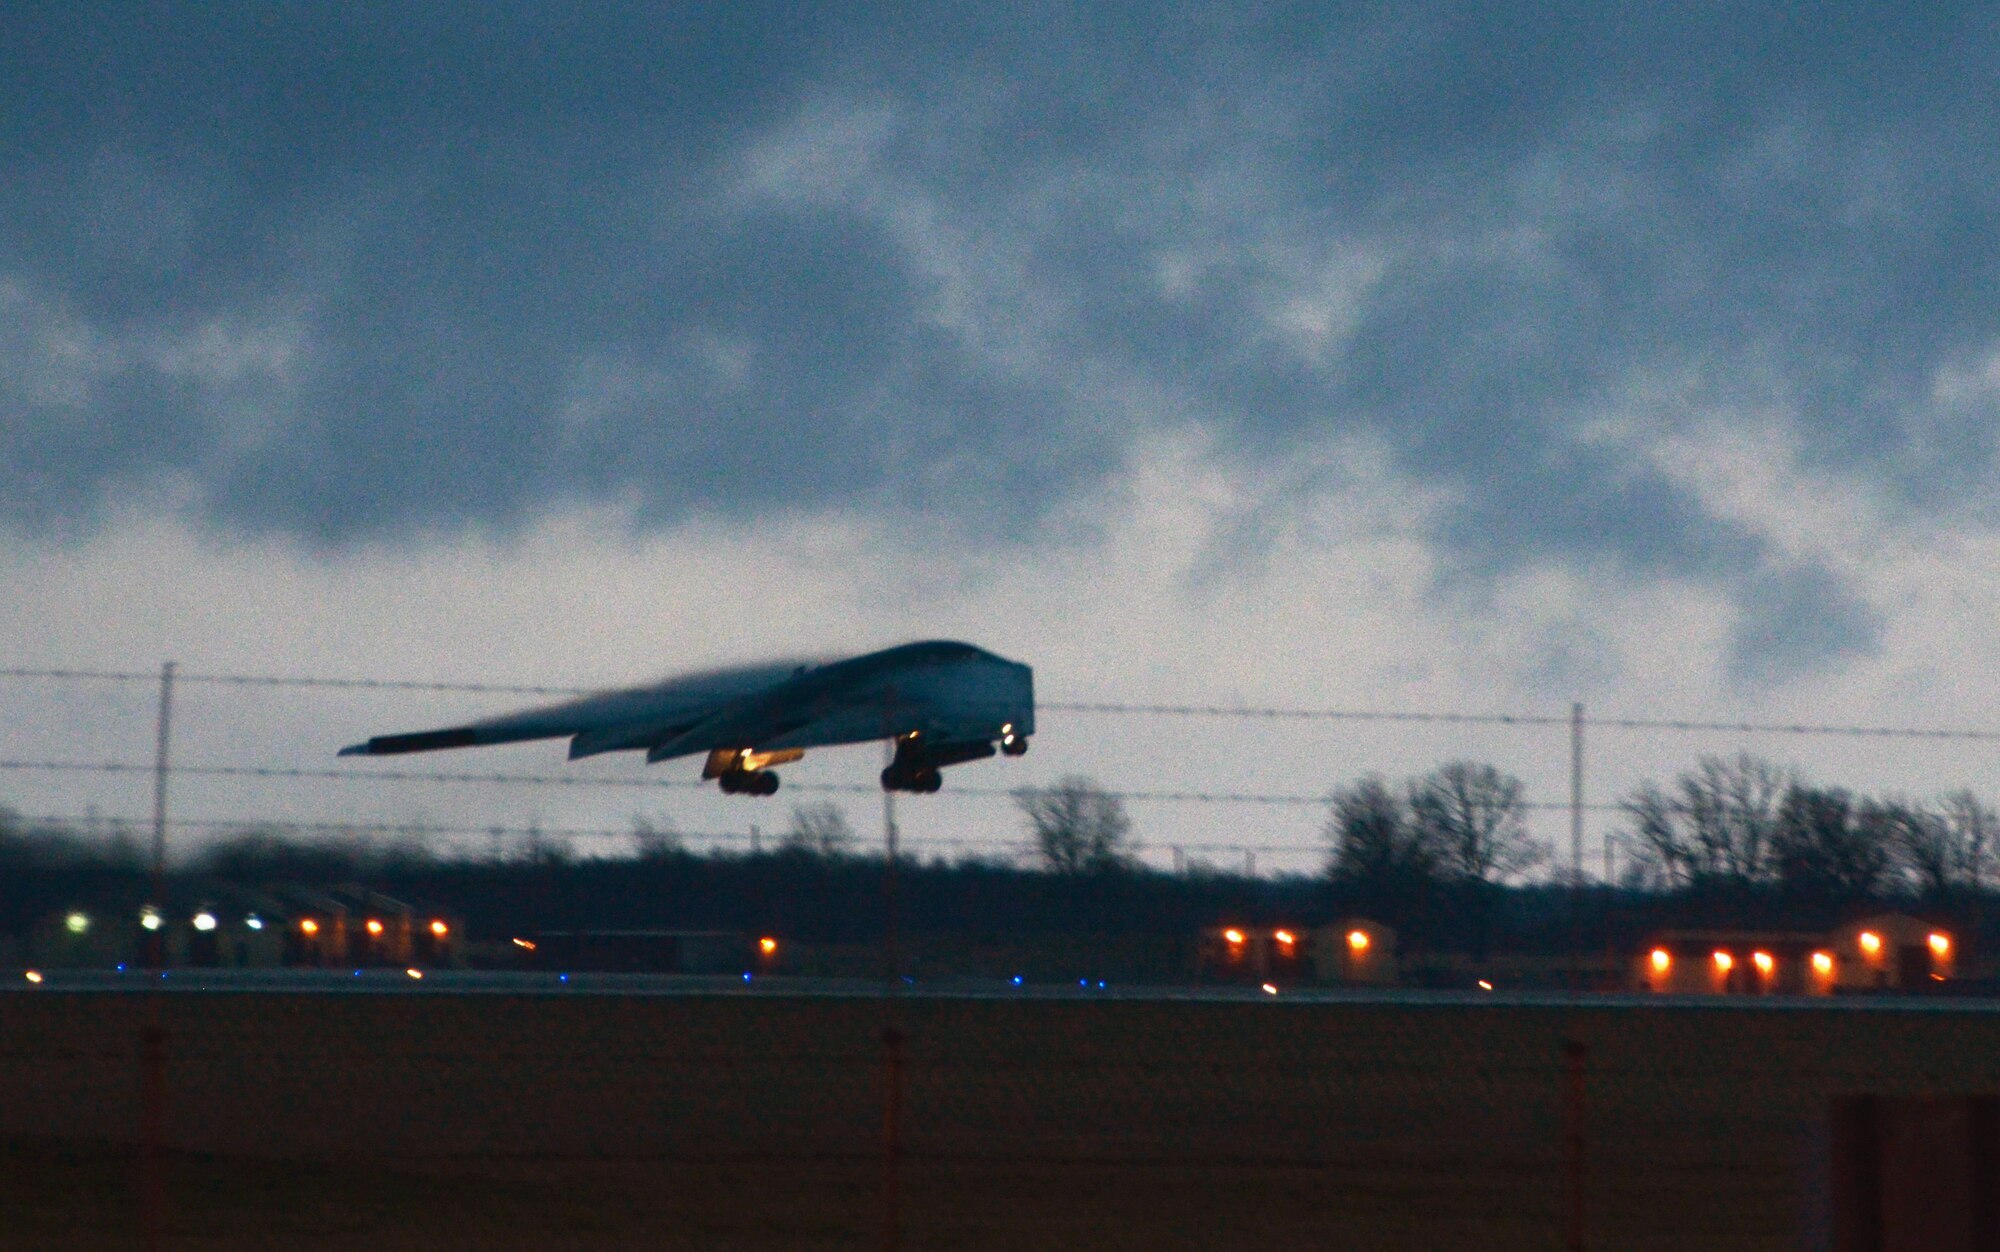 A B-2 Spirit takes off at dawn from Whiteman Air Force Base, Mo, April 2, 2014.  Two B-2 Spirit strategic bombers from Whiteman Air Force Base, Mo., and two B-52 Stratofortress strategic bombers from Barksdale Air Force Base, La., flew nonstop from their respective home stations to training ranges within the vicinity of Hawaii and conducted long range training operations and low approach flights at Hickam AFB.  These training flights, which were approximately 21 and 20 hours respectively, ensure U.S. strategic bomber forces maintain a high state of readiness and demonstrate U.S. Strategic Command’s ability to provide a bomber force that is flexible, credible and always ready to respond to a variety of threats and situations around the world.  This ensures that the President of the United States has capable, credible and scalable military options to meet national security obligations to the U.S. and its Allies and partners.  (U.S. Air National Guard photo by Senior Master Sgt. Mary-Dale Amison/Released)